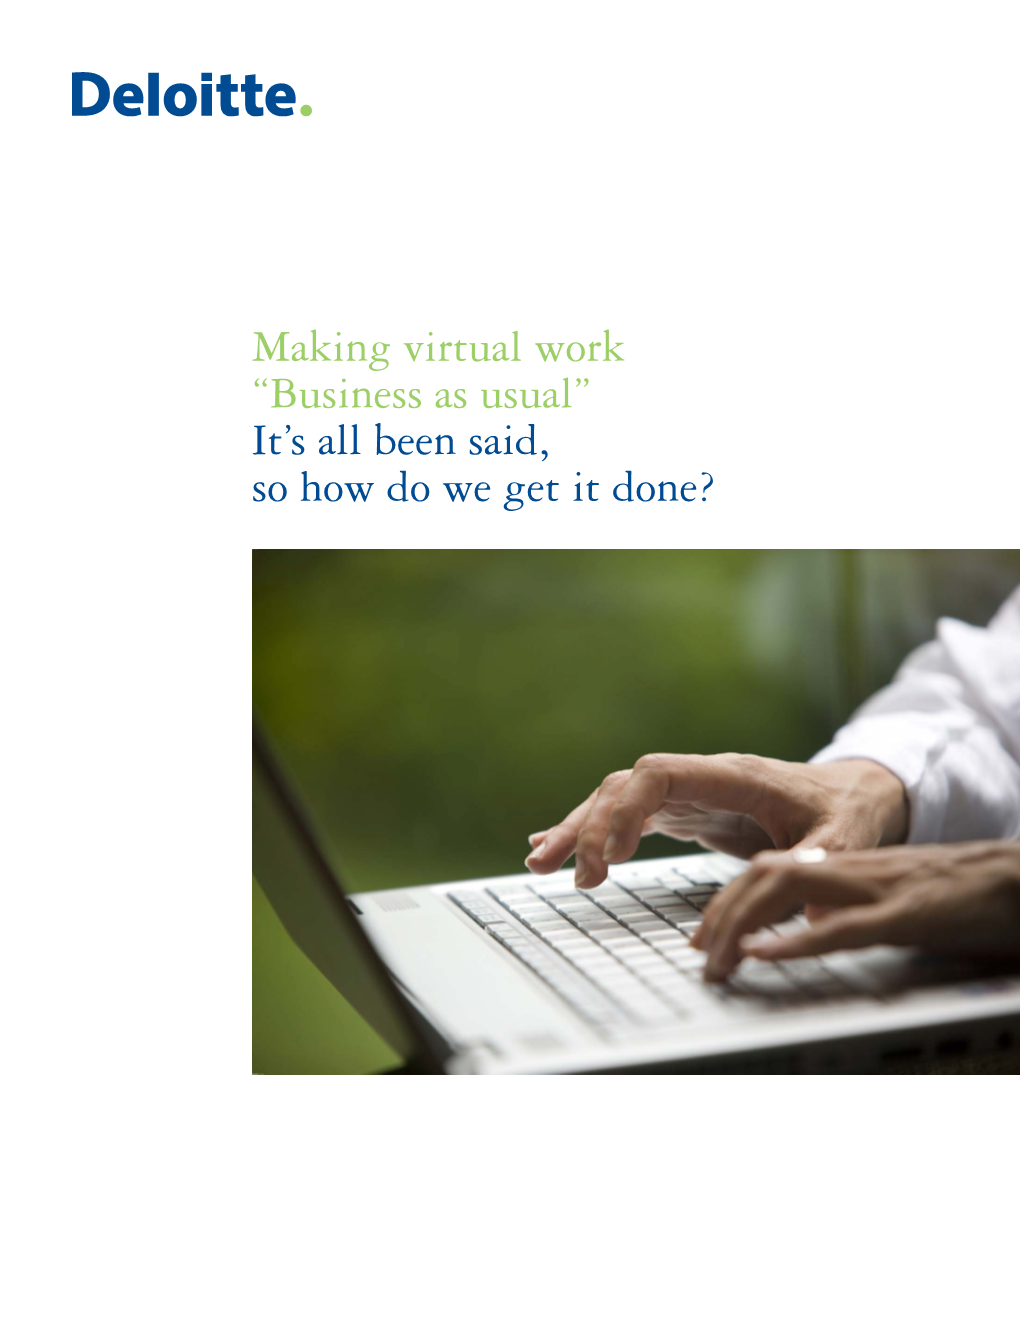 Making Virtual Work “Business As Usual” It's All Been Said, So How Do We Get It Done?